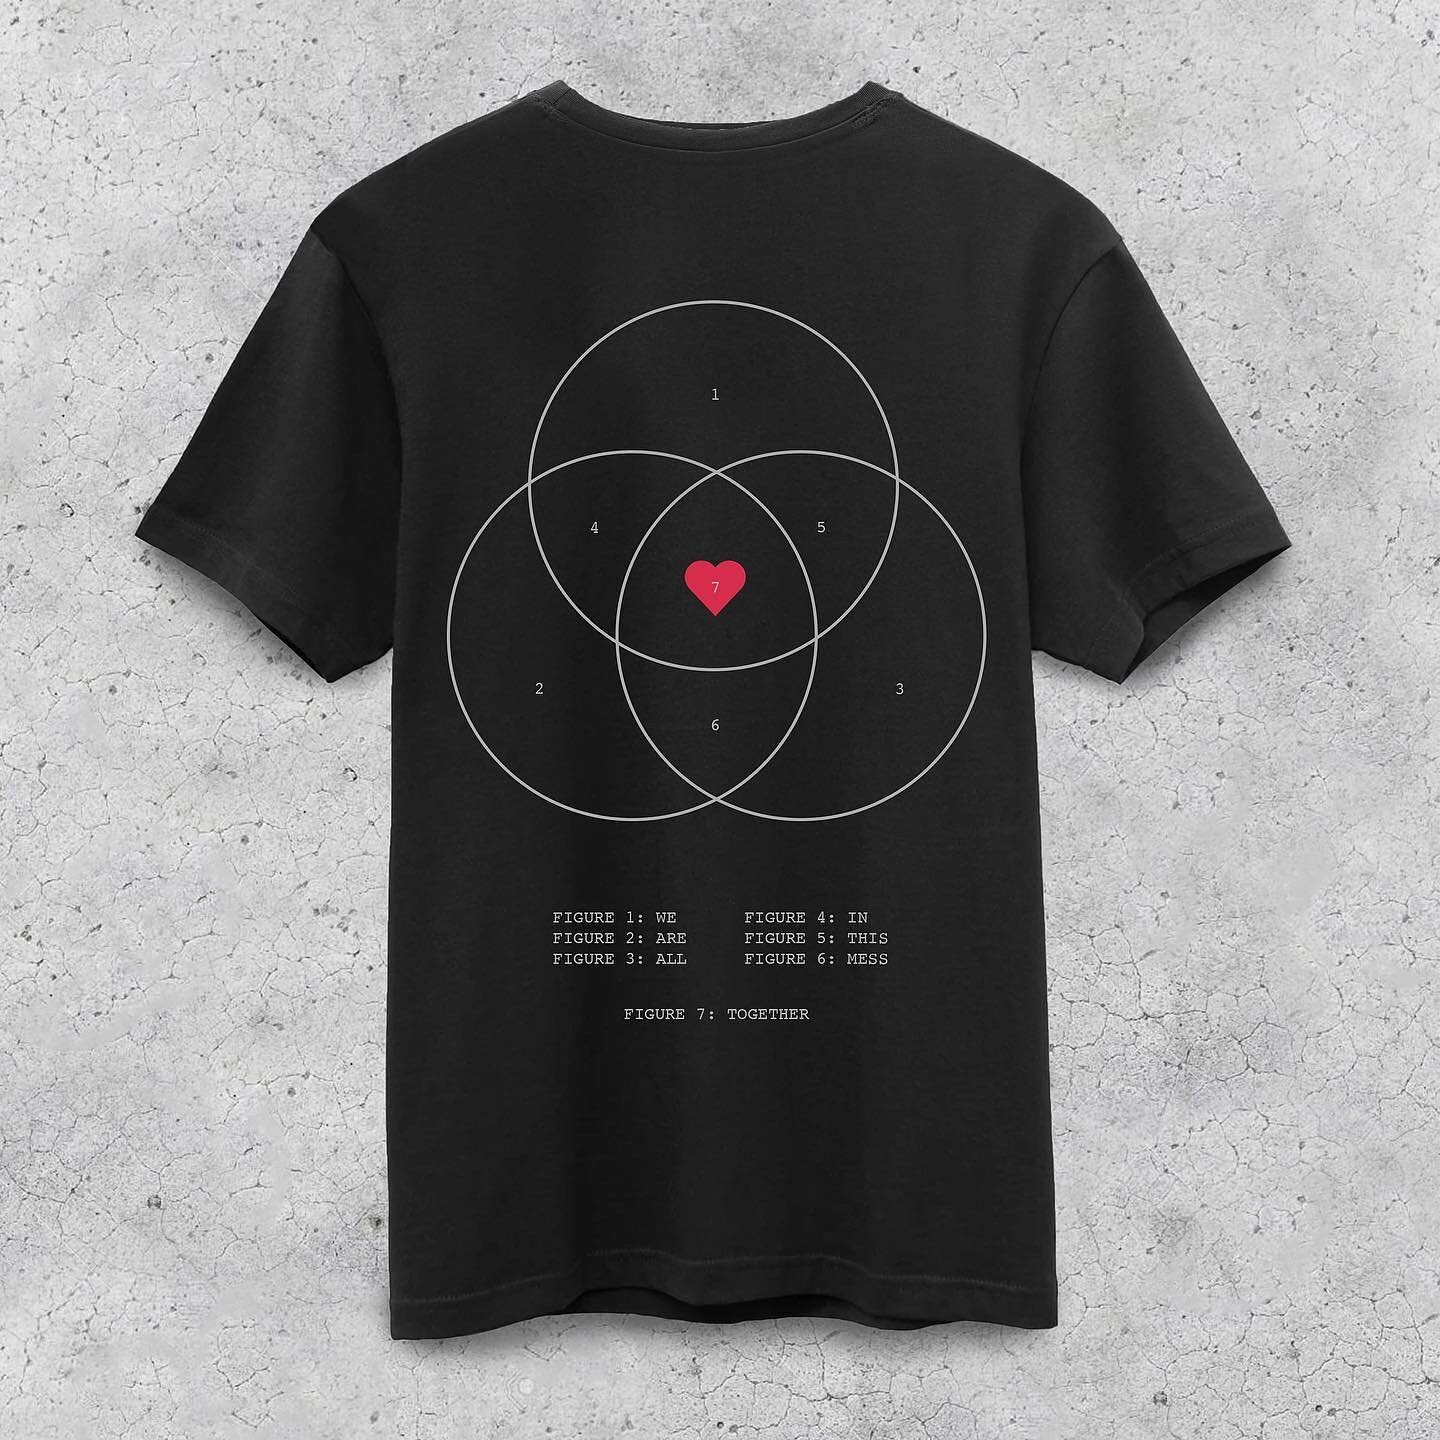 &ldquo;Together Tee&rdquo; now available for purchase online at foreignform.com ❤️❤️
-
As many Denver families experience food insecurities due to Covid-19 we are reminded that &ldquo;We Are All In This Mess Together&rdquo;. With that in mind, we are